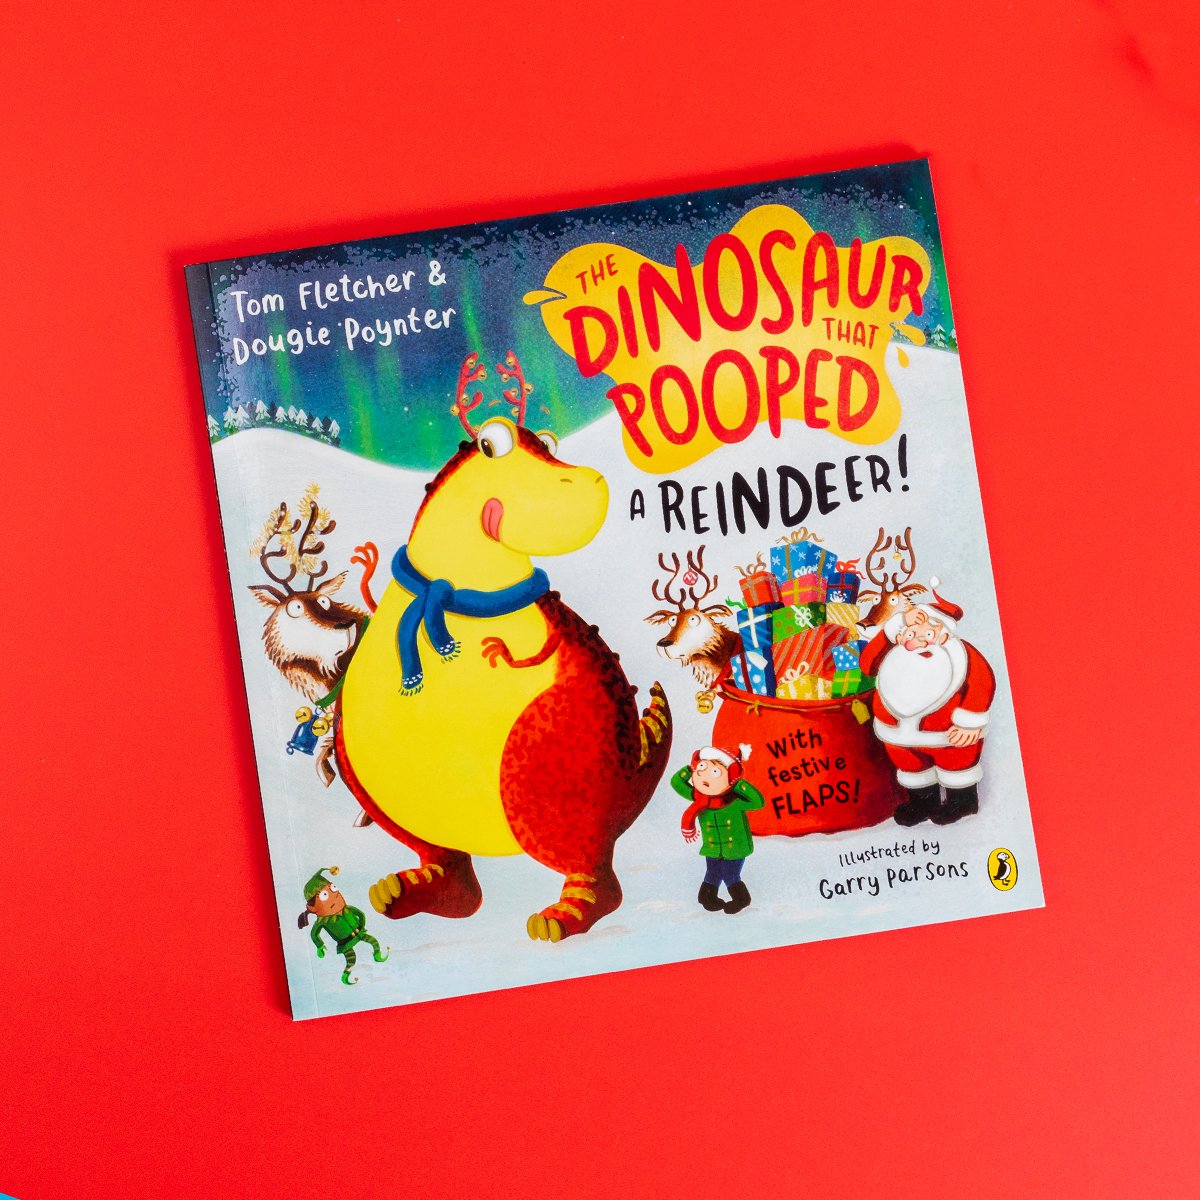 POOP-TASTIC news! The Dinosaur that Pooped a Reindeer is the latest disgustingly funny adventure in the bestselling series from @TomFletcher @dougiepoynter and illustrated by @icandrawdinos 💩 Out now! 🦖🎄 bit.ly/dinopoopedrein…